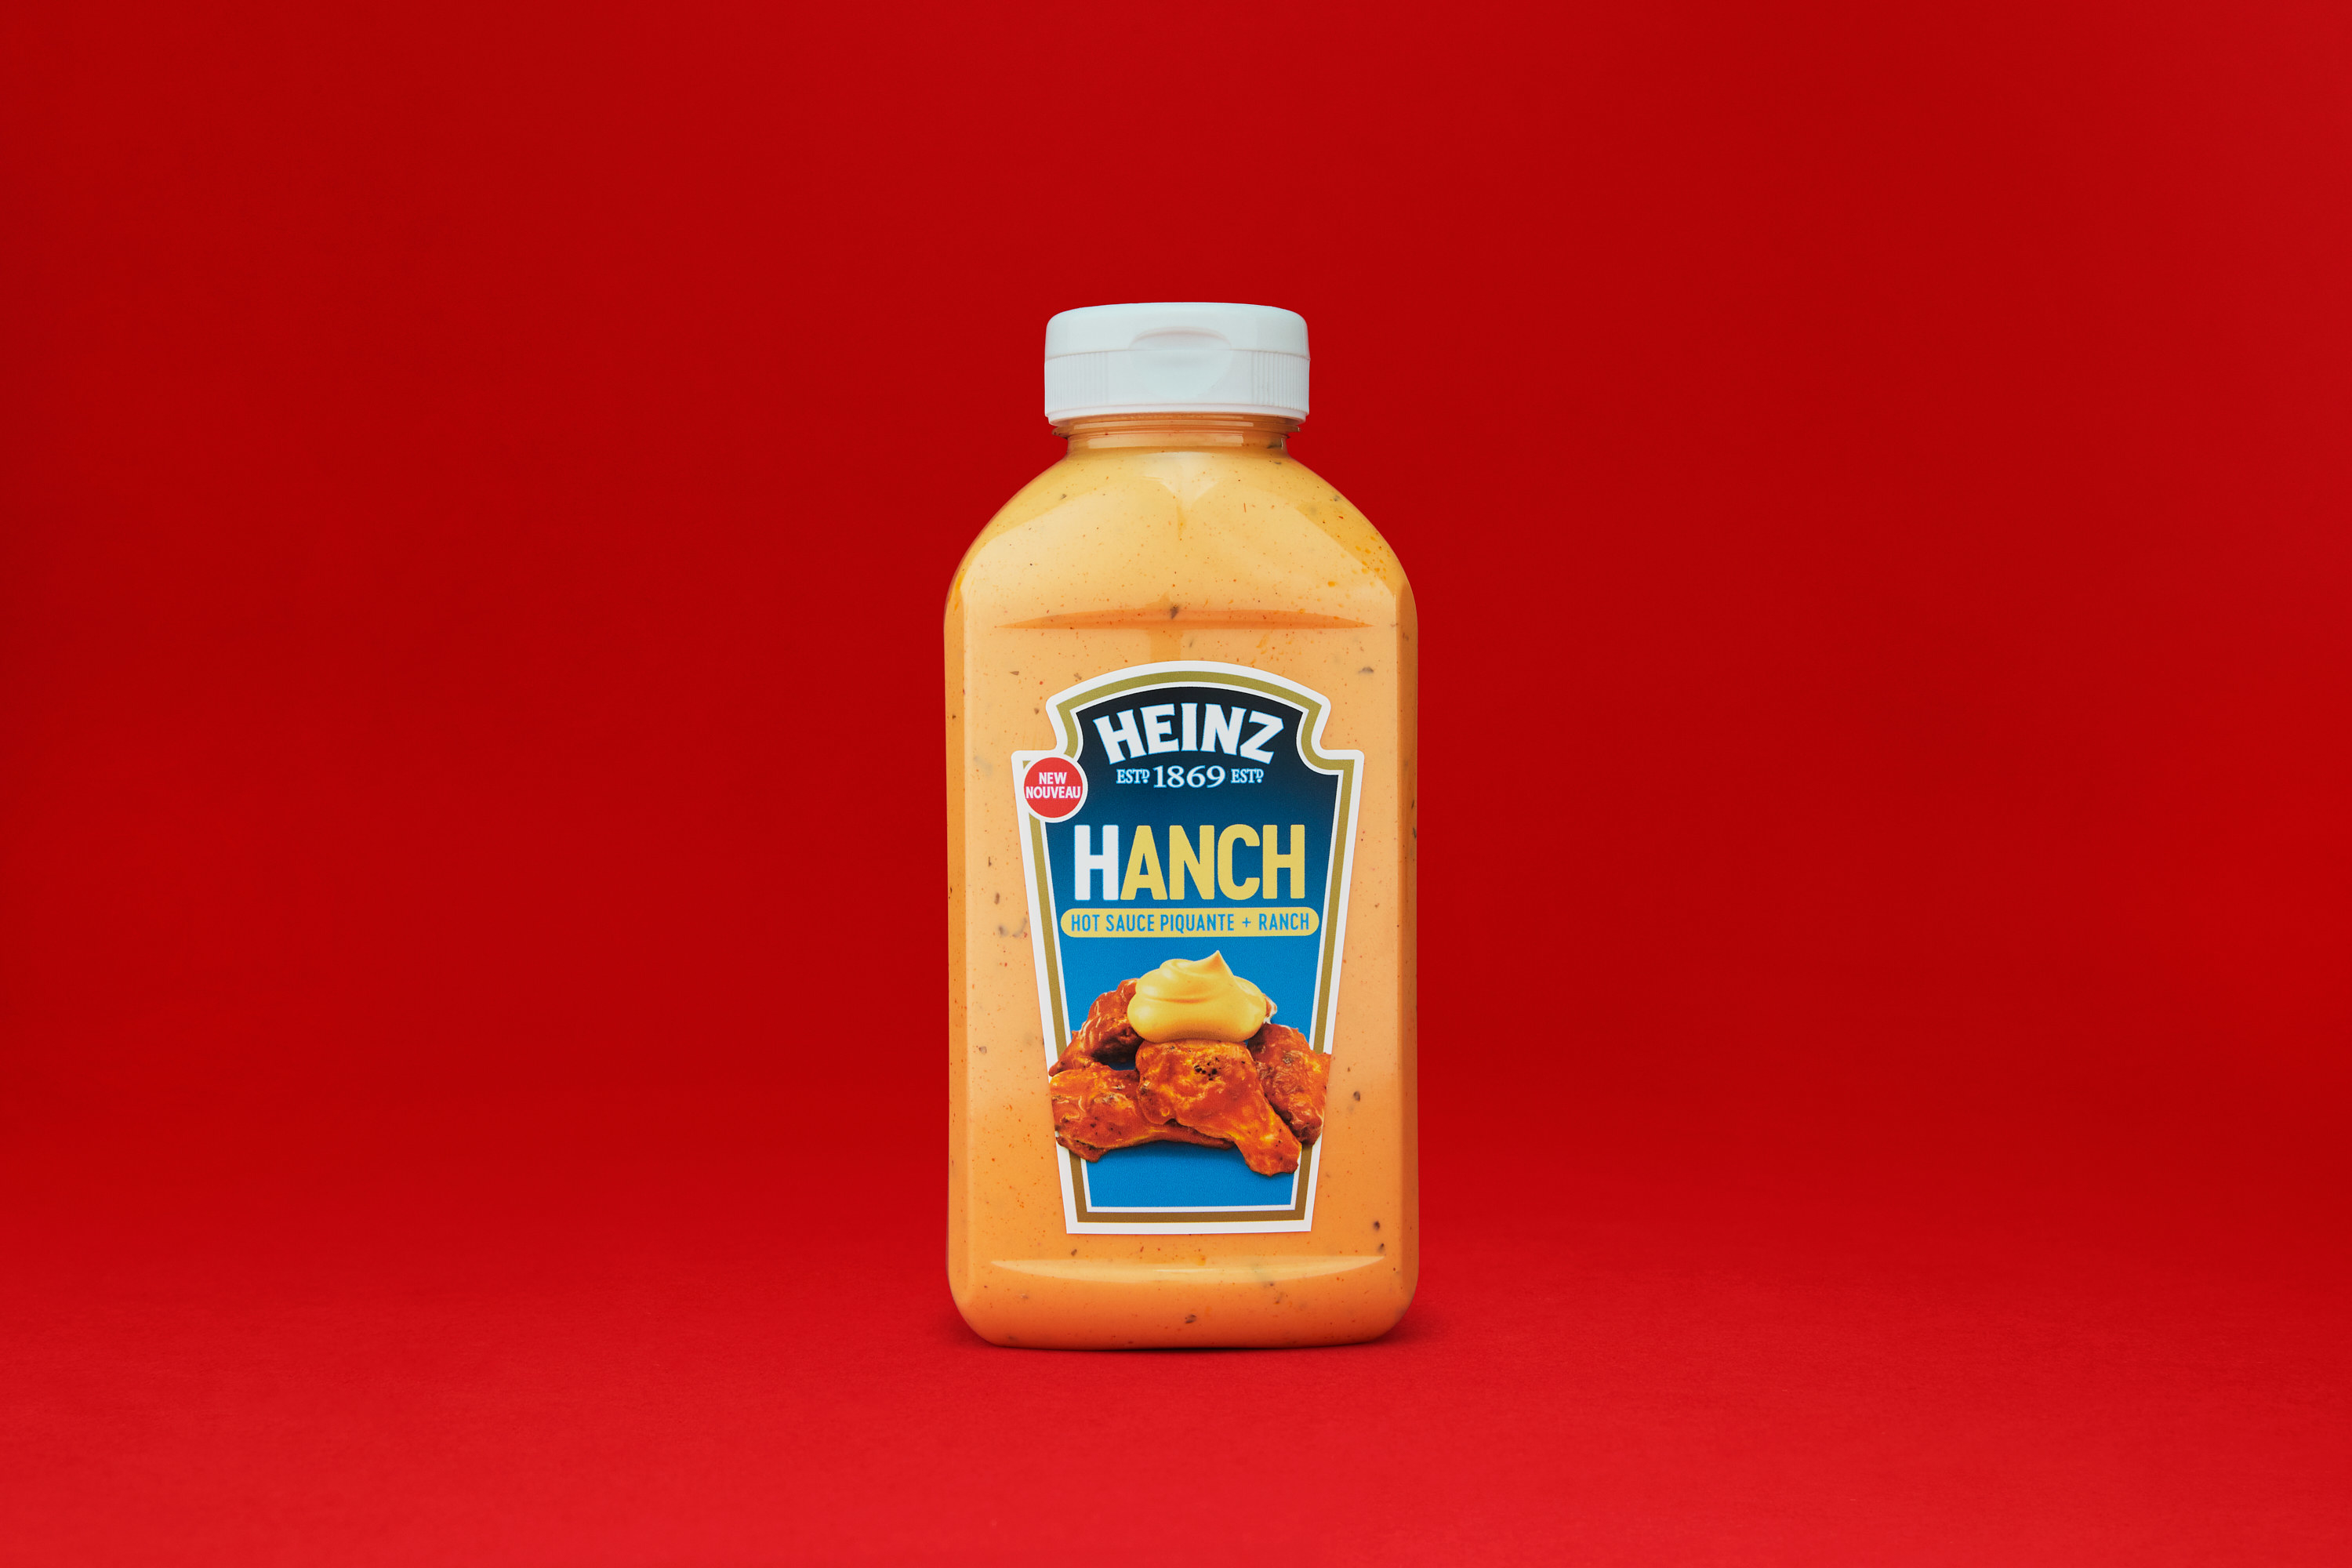 A bottle of Hanch sauce on a red backdrop.